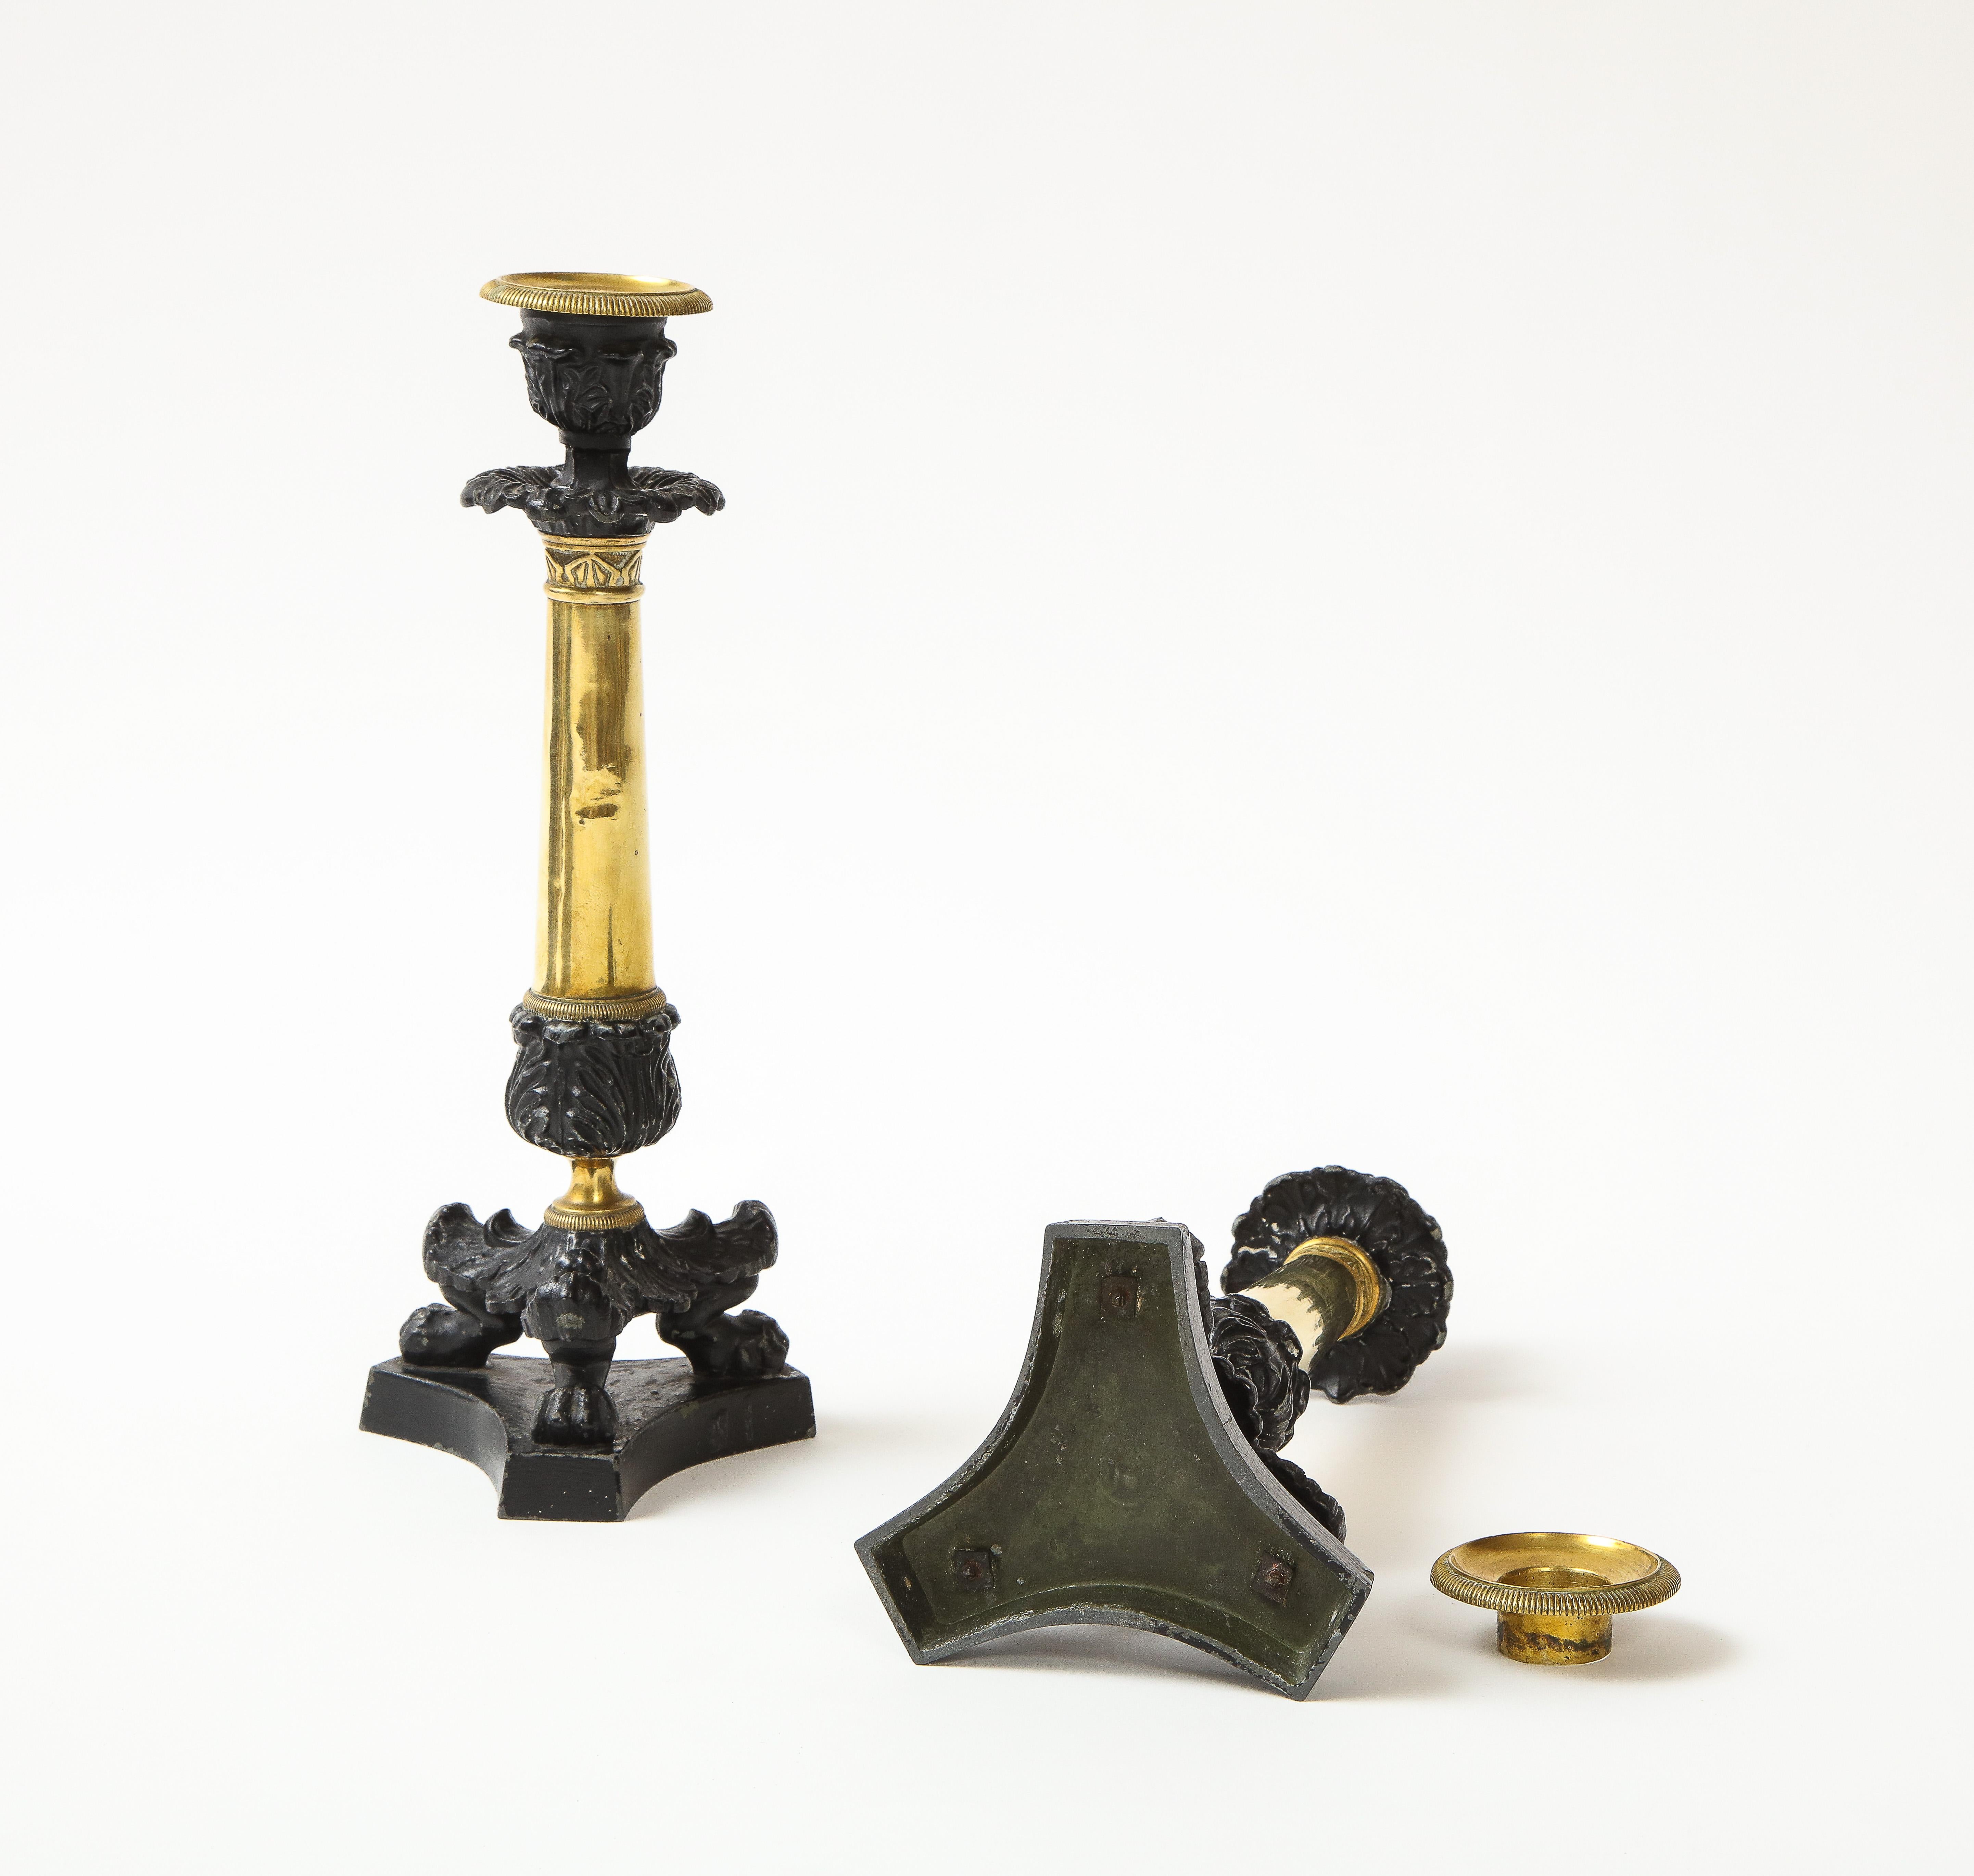 Pair of French Empire Polished Brass and Black-Enameled Cast Iron Candlesticks For Sale 4